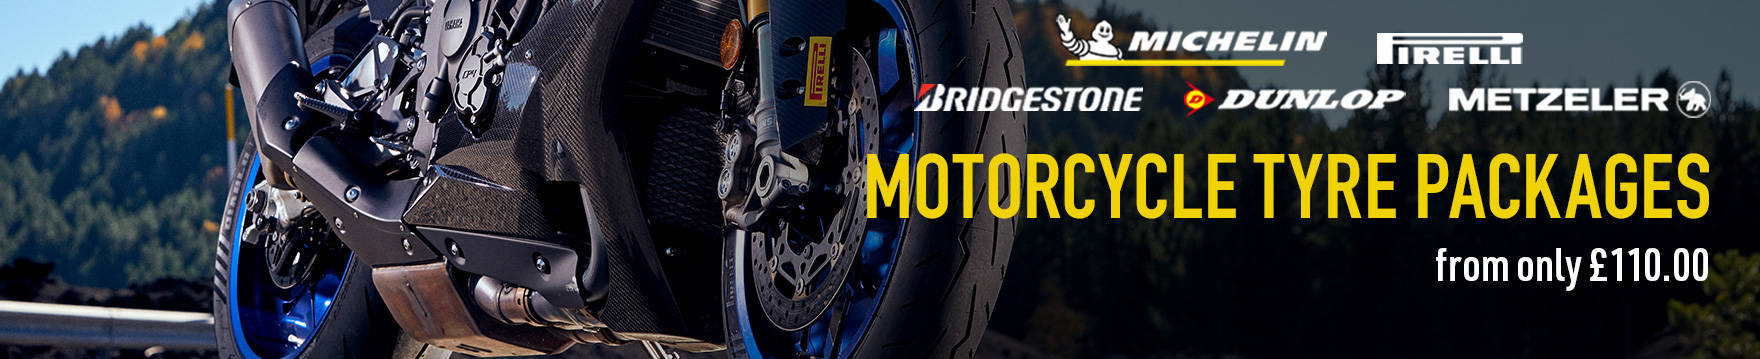 Motorcycle Tyre Packages